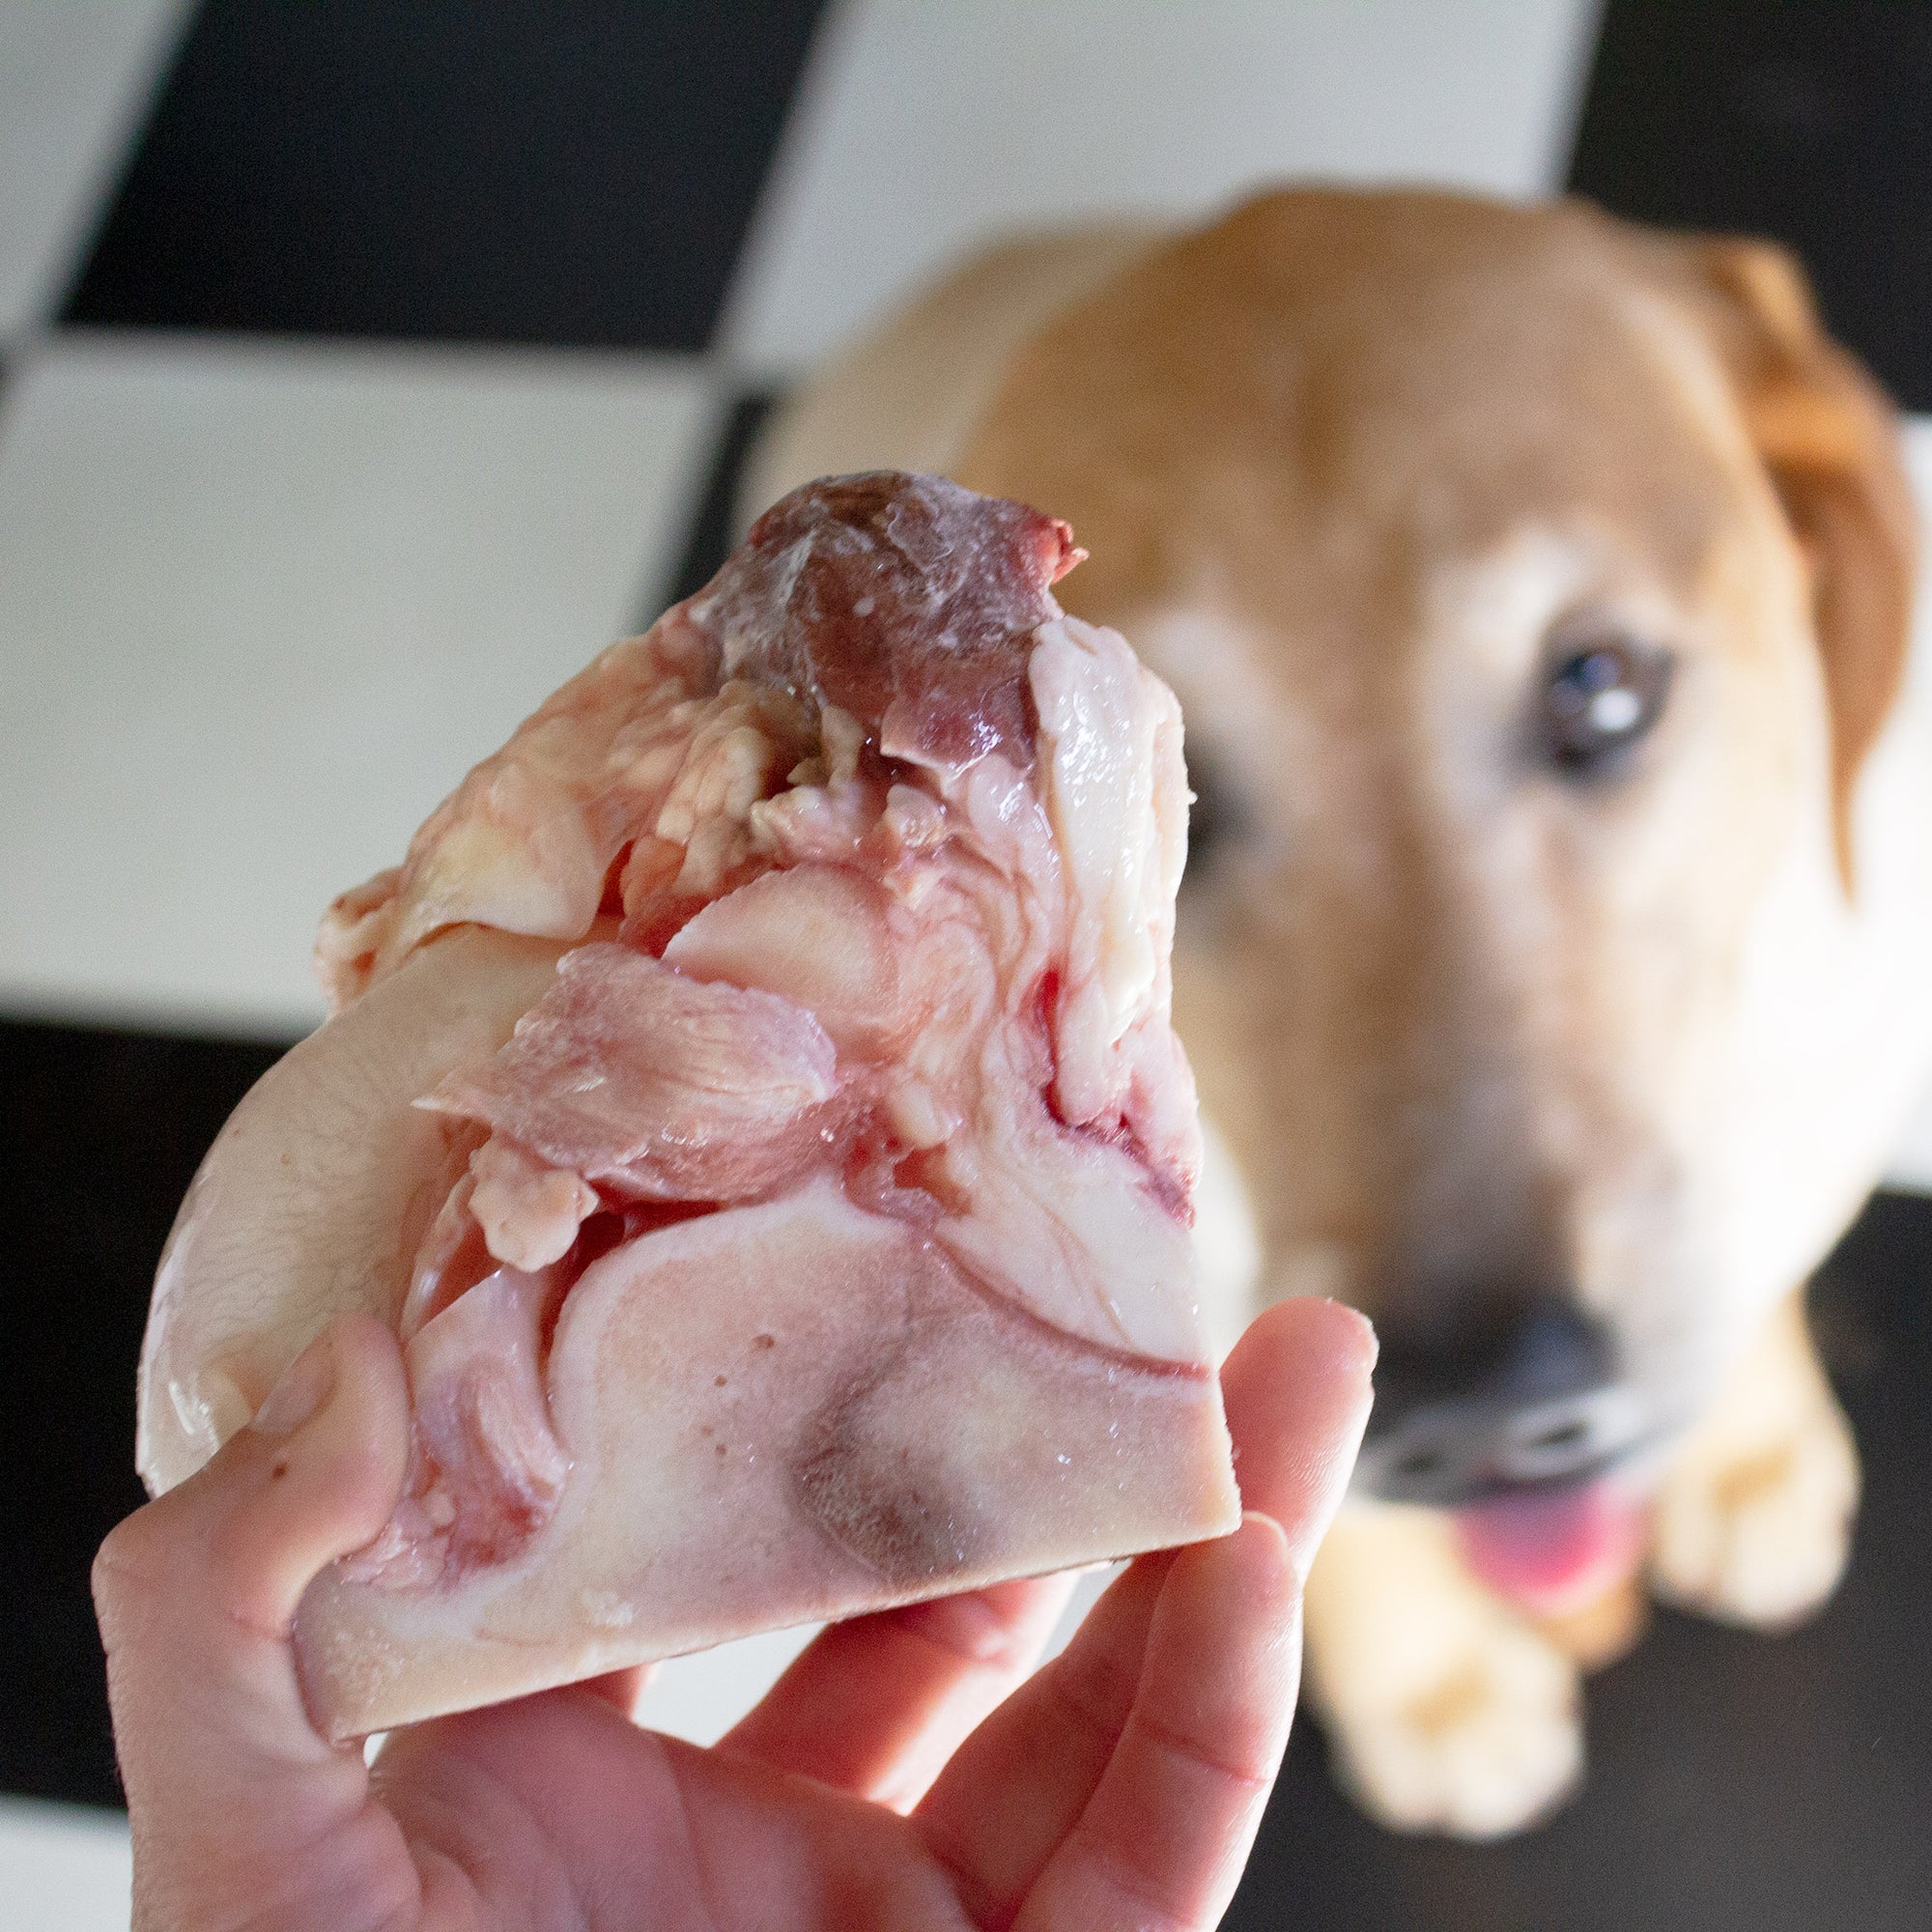 Maxota Raw: Large Knuckle Bones - Healthy, Natural Treats for Dogs